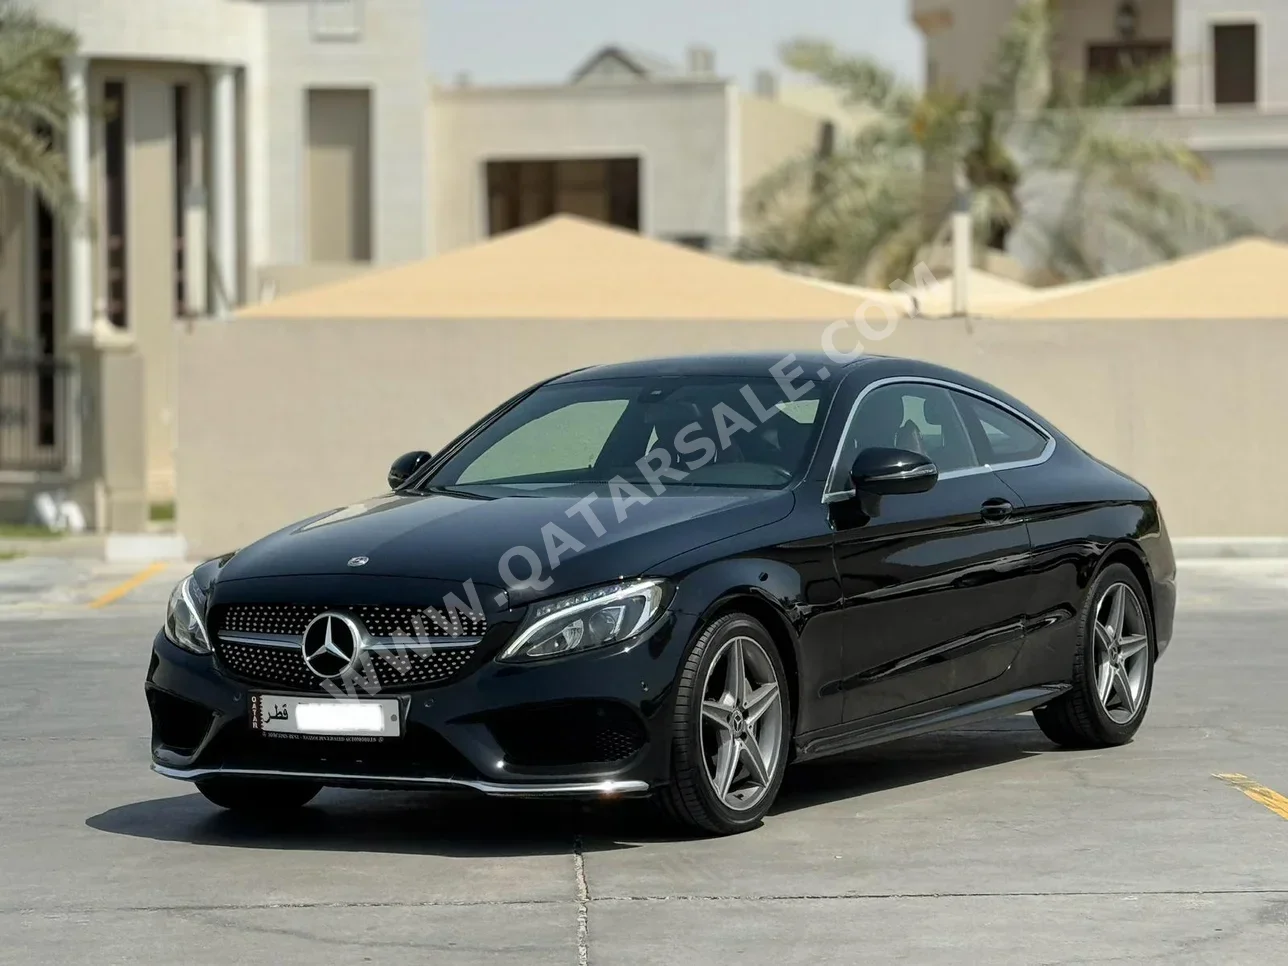 Mercedes-Benz  C-Class  200 AMG  2018  Automatic  130,000 Km  4 Cylinder  Rear Wheel Drive (RWD)  Coupe / Sport  Black